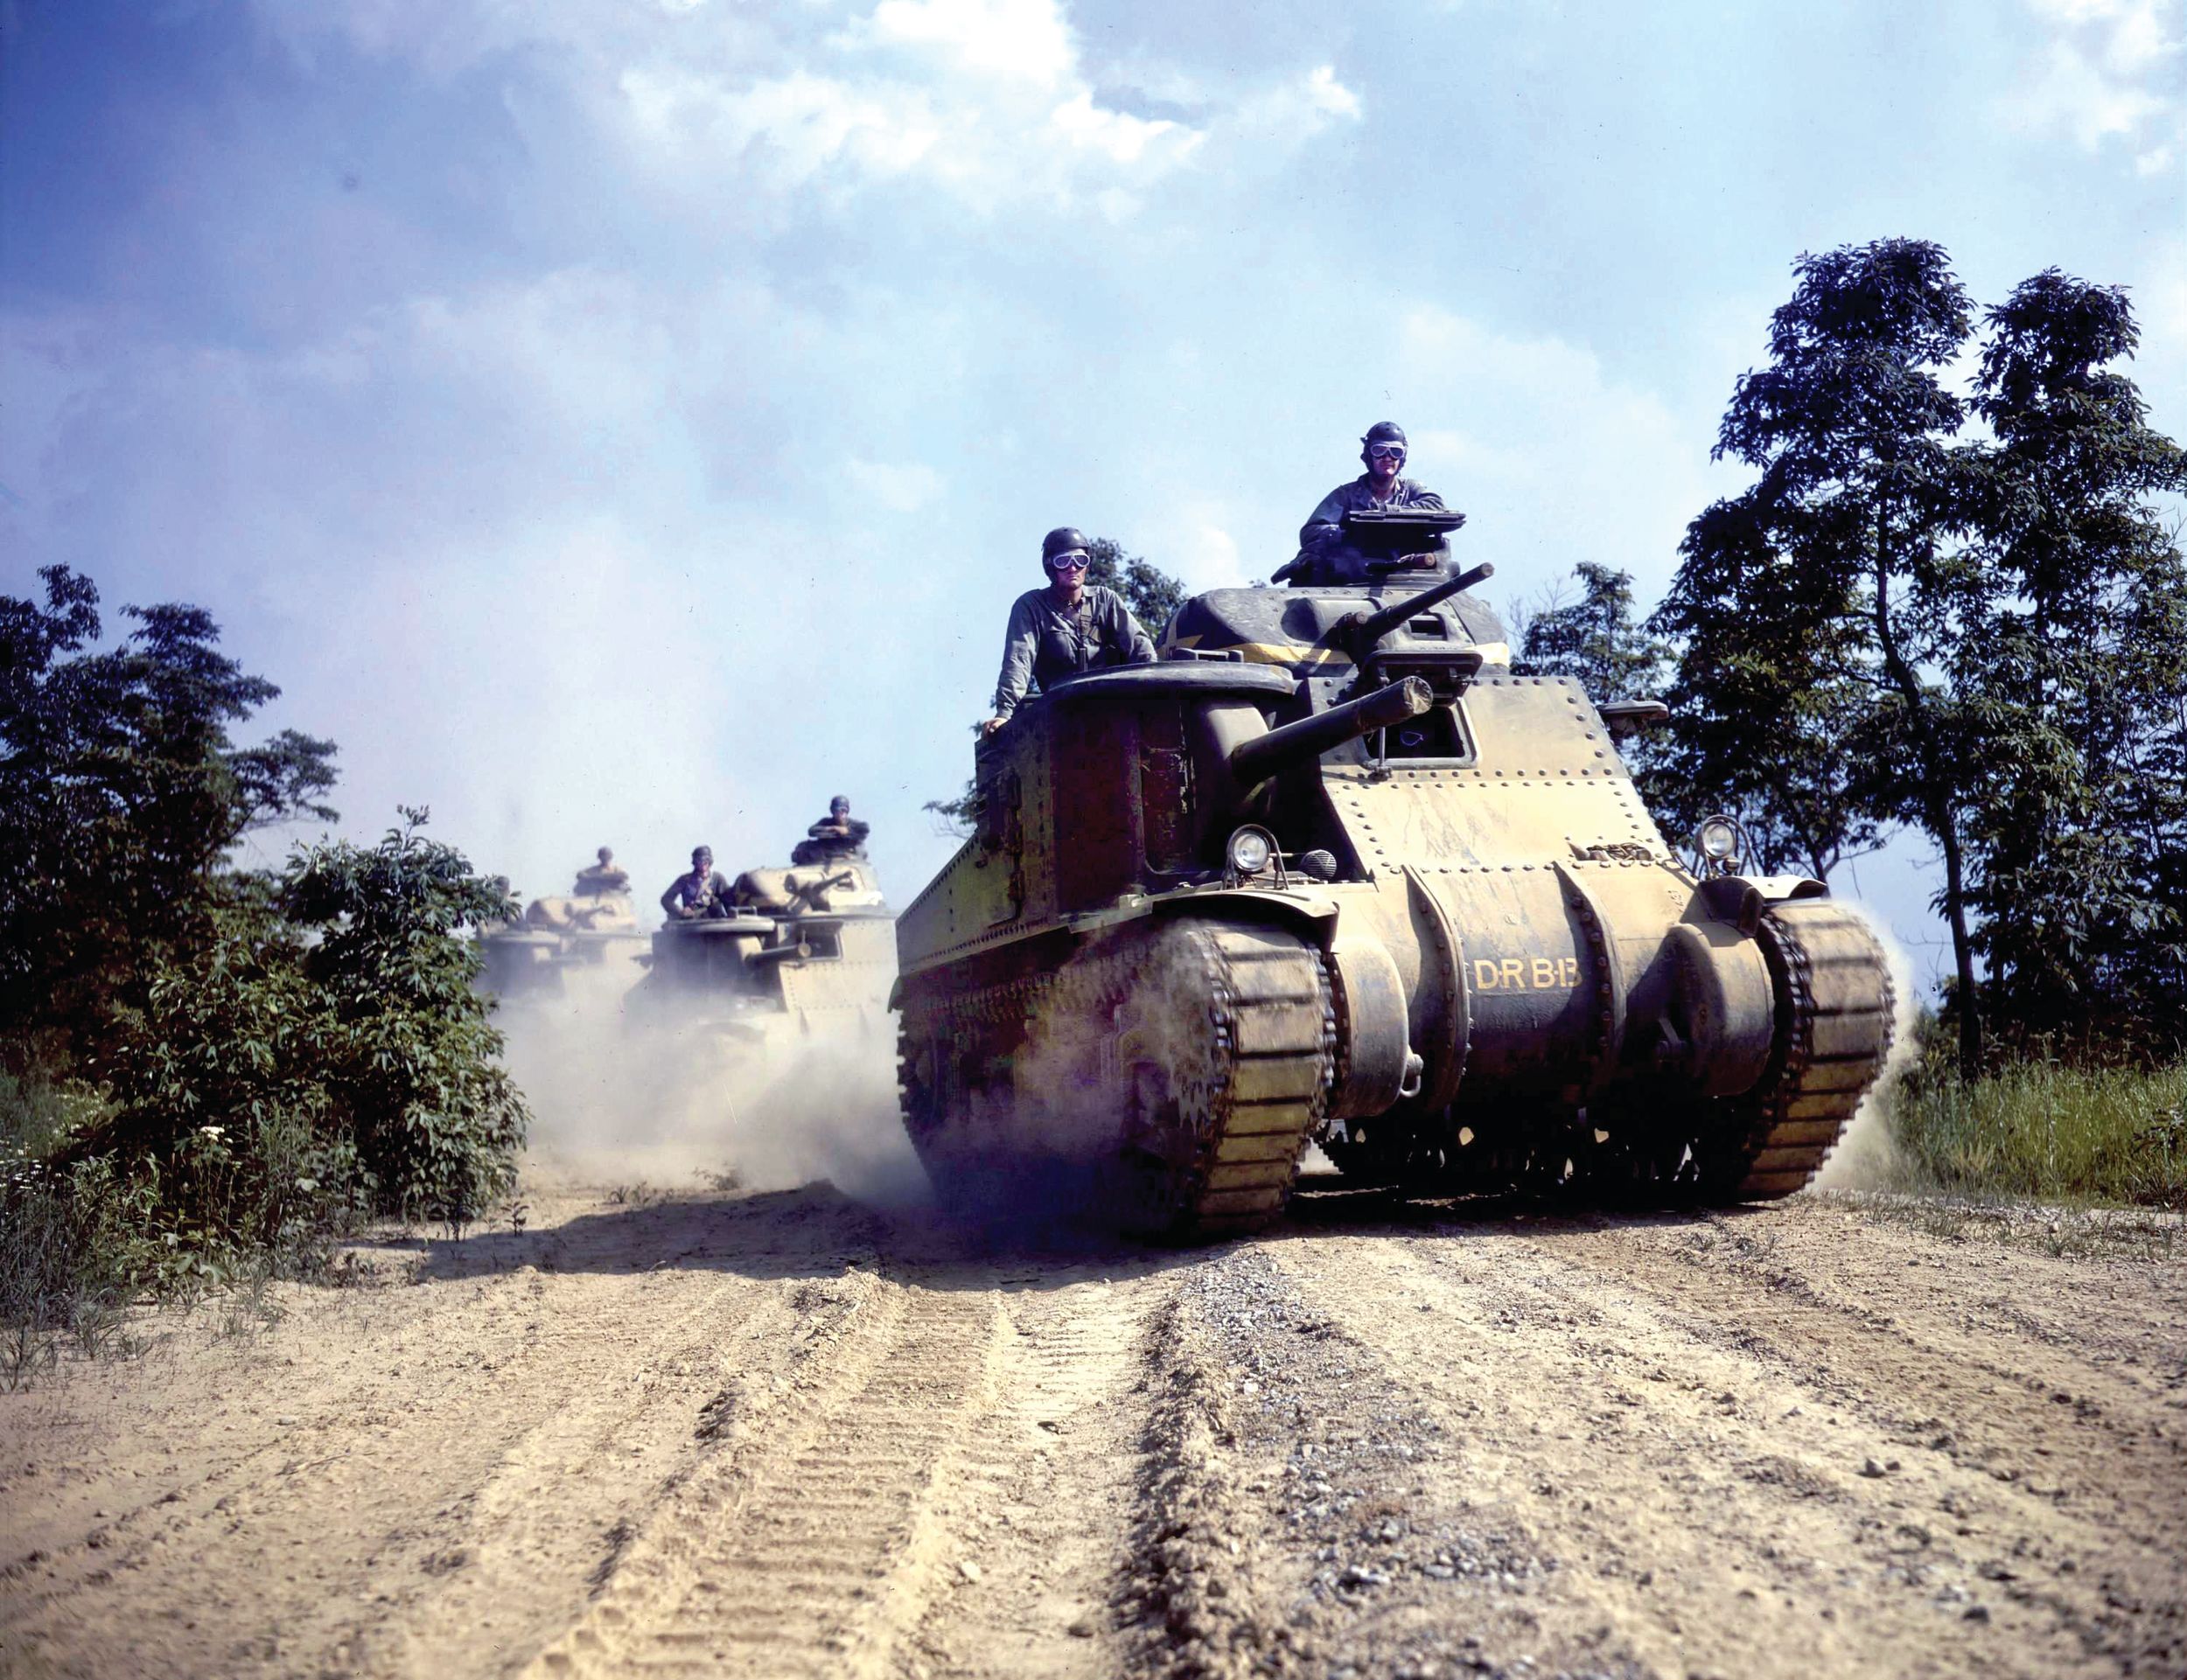 An M3 Grant tank leads a column of armored vehicles during maneuvers at Fort Knox, Kentucky, in June 1942. The Grant was a stopgap design with a sponson mounted 75mm gun.